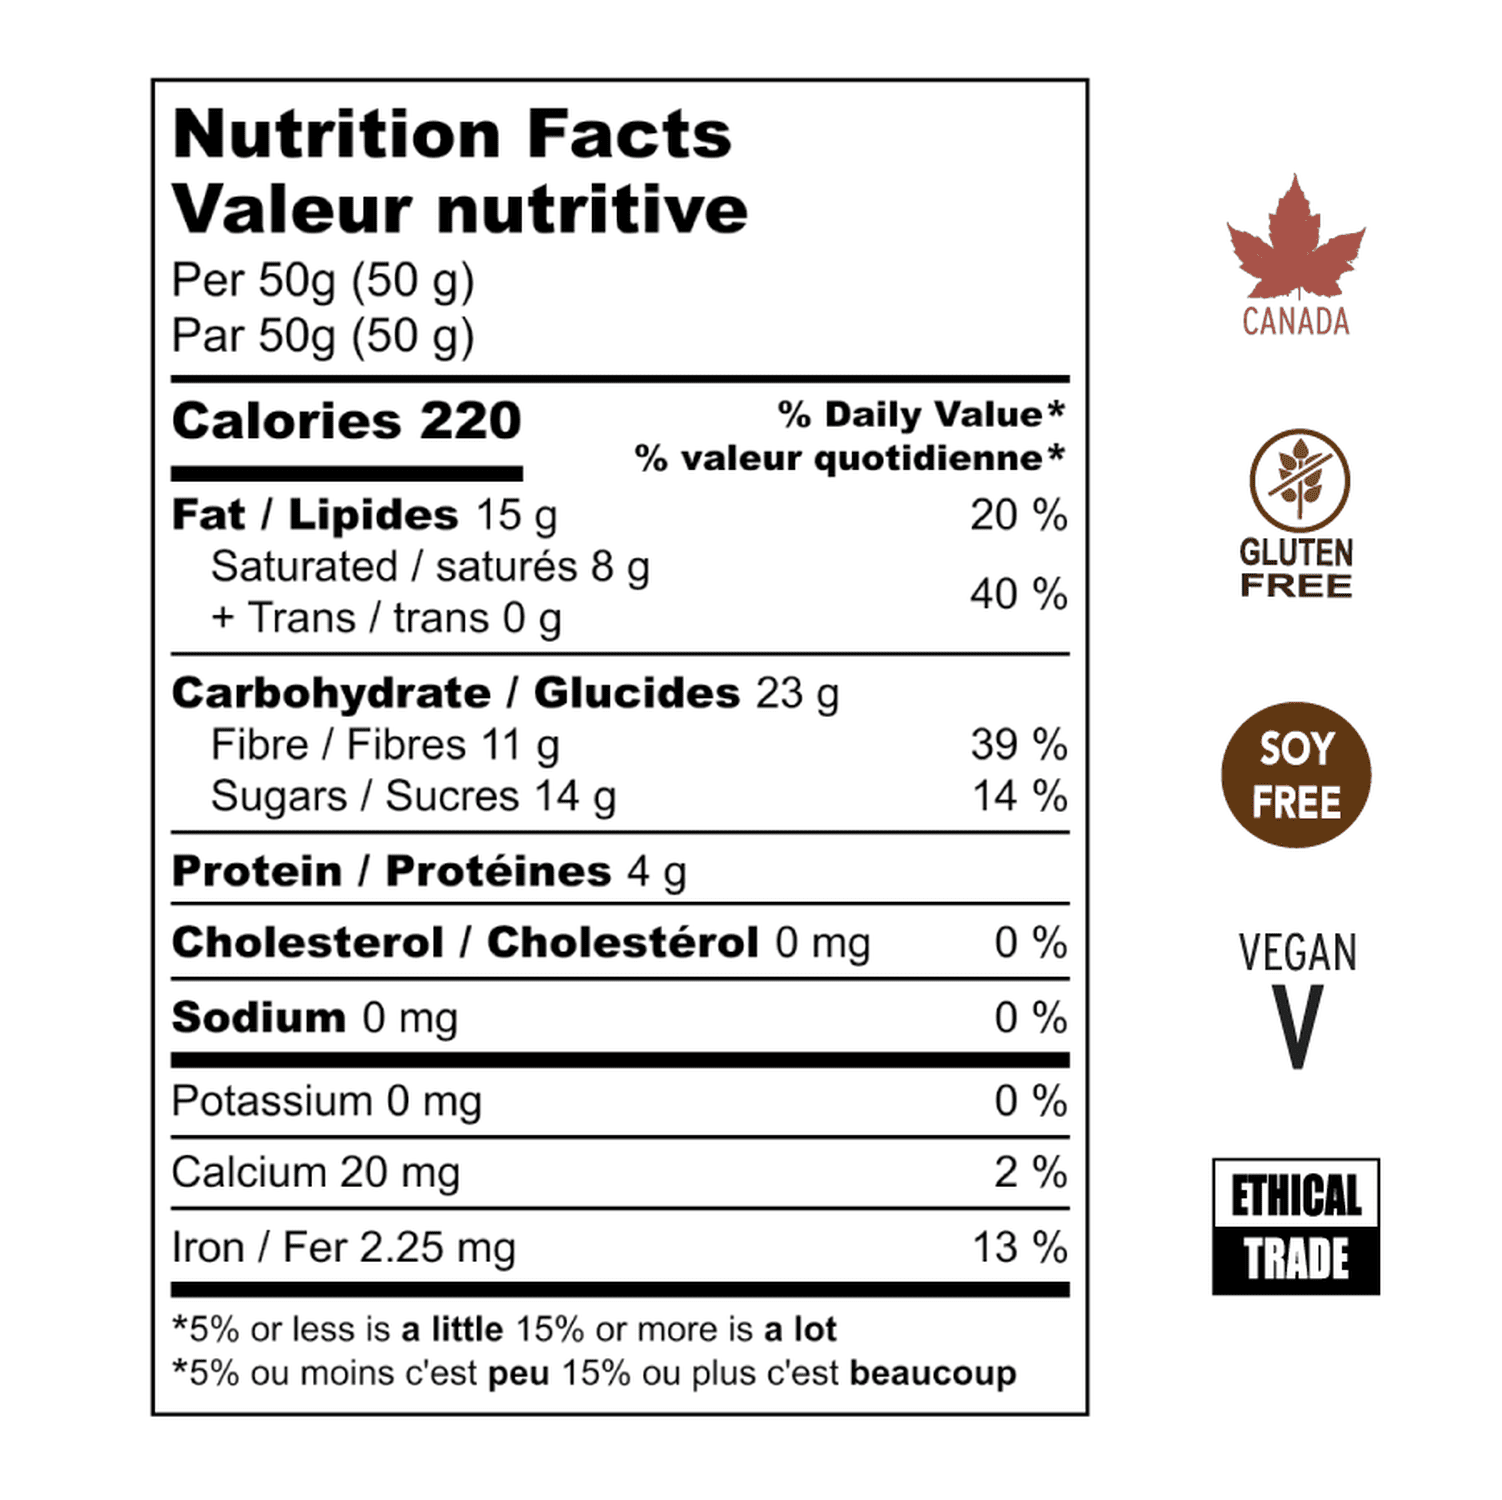 Nutritional Facts for Dark Chocolate Covered Coffee Beans. Soy Free, Gluten Free, Vegan, Ethical Trade, Made in Canada.